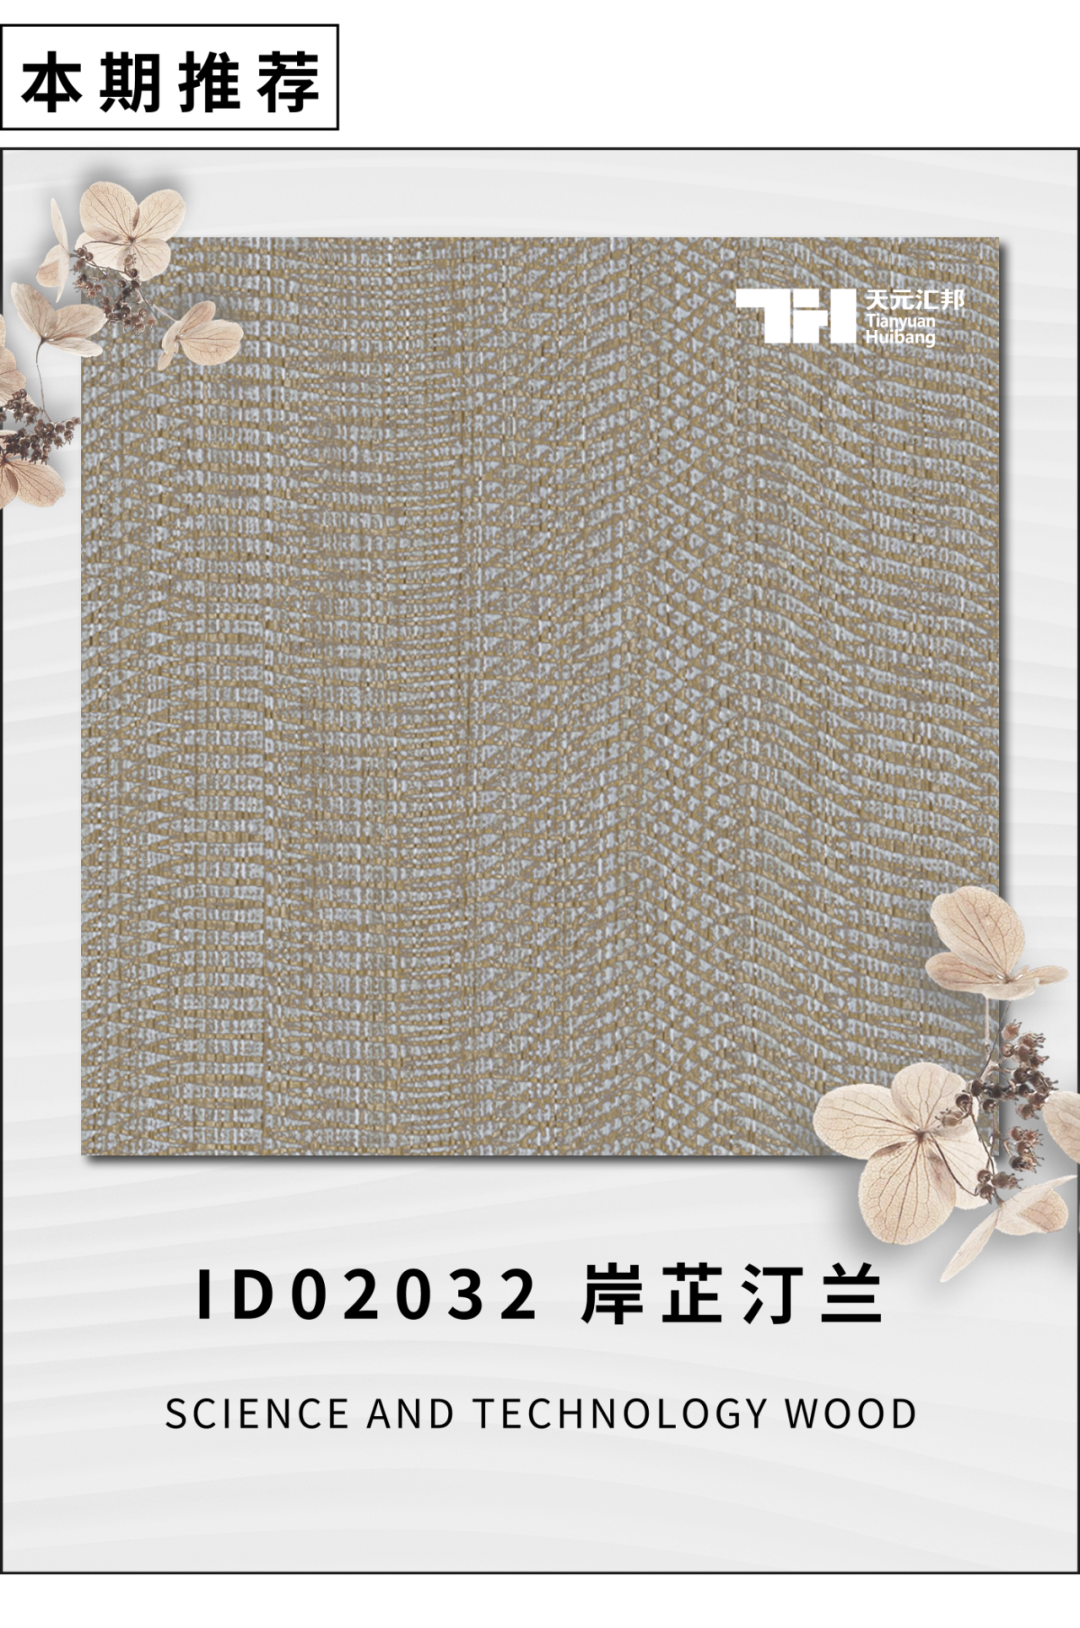 ID02032 岸芷汀兰 Science and technology wood